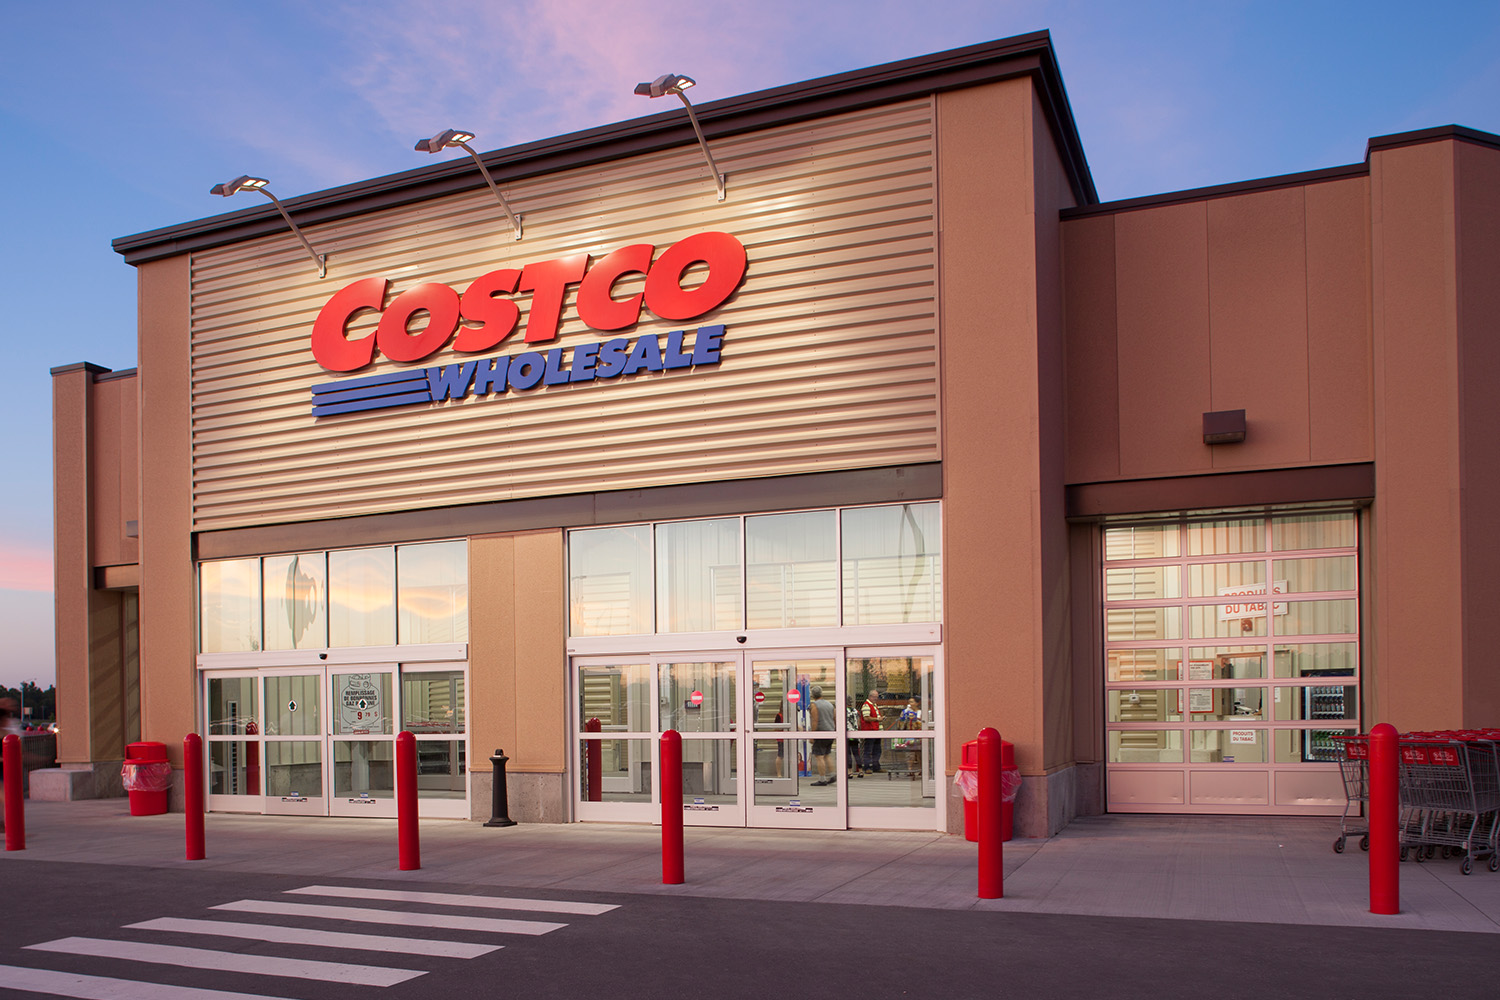 I'm a Costco fan - their best liquors can replace your name-brand favorites